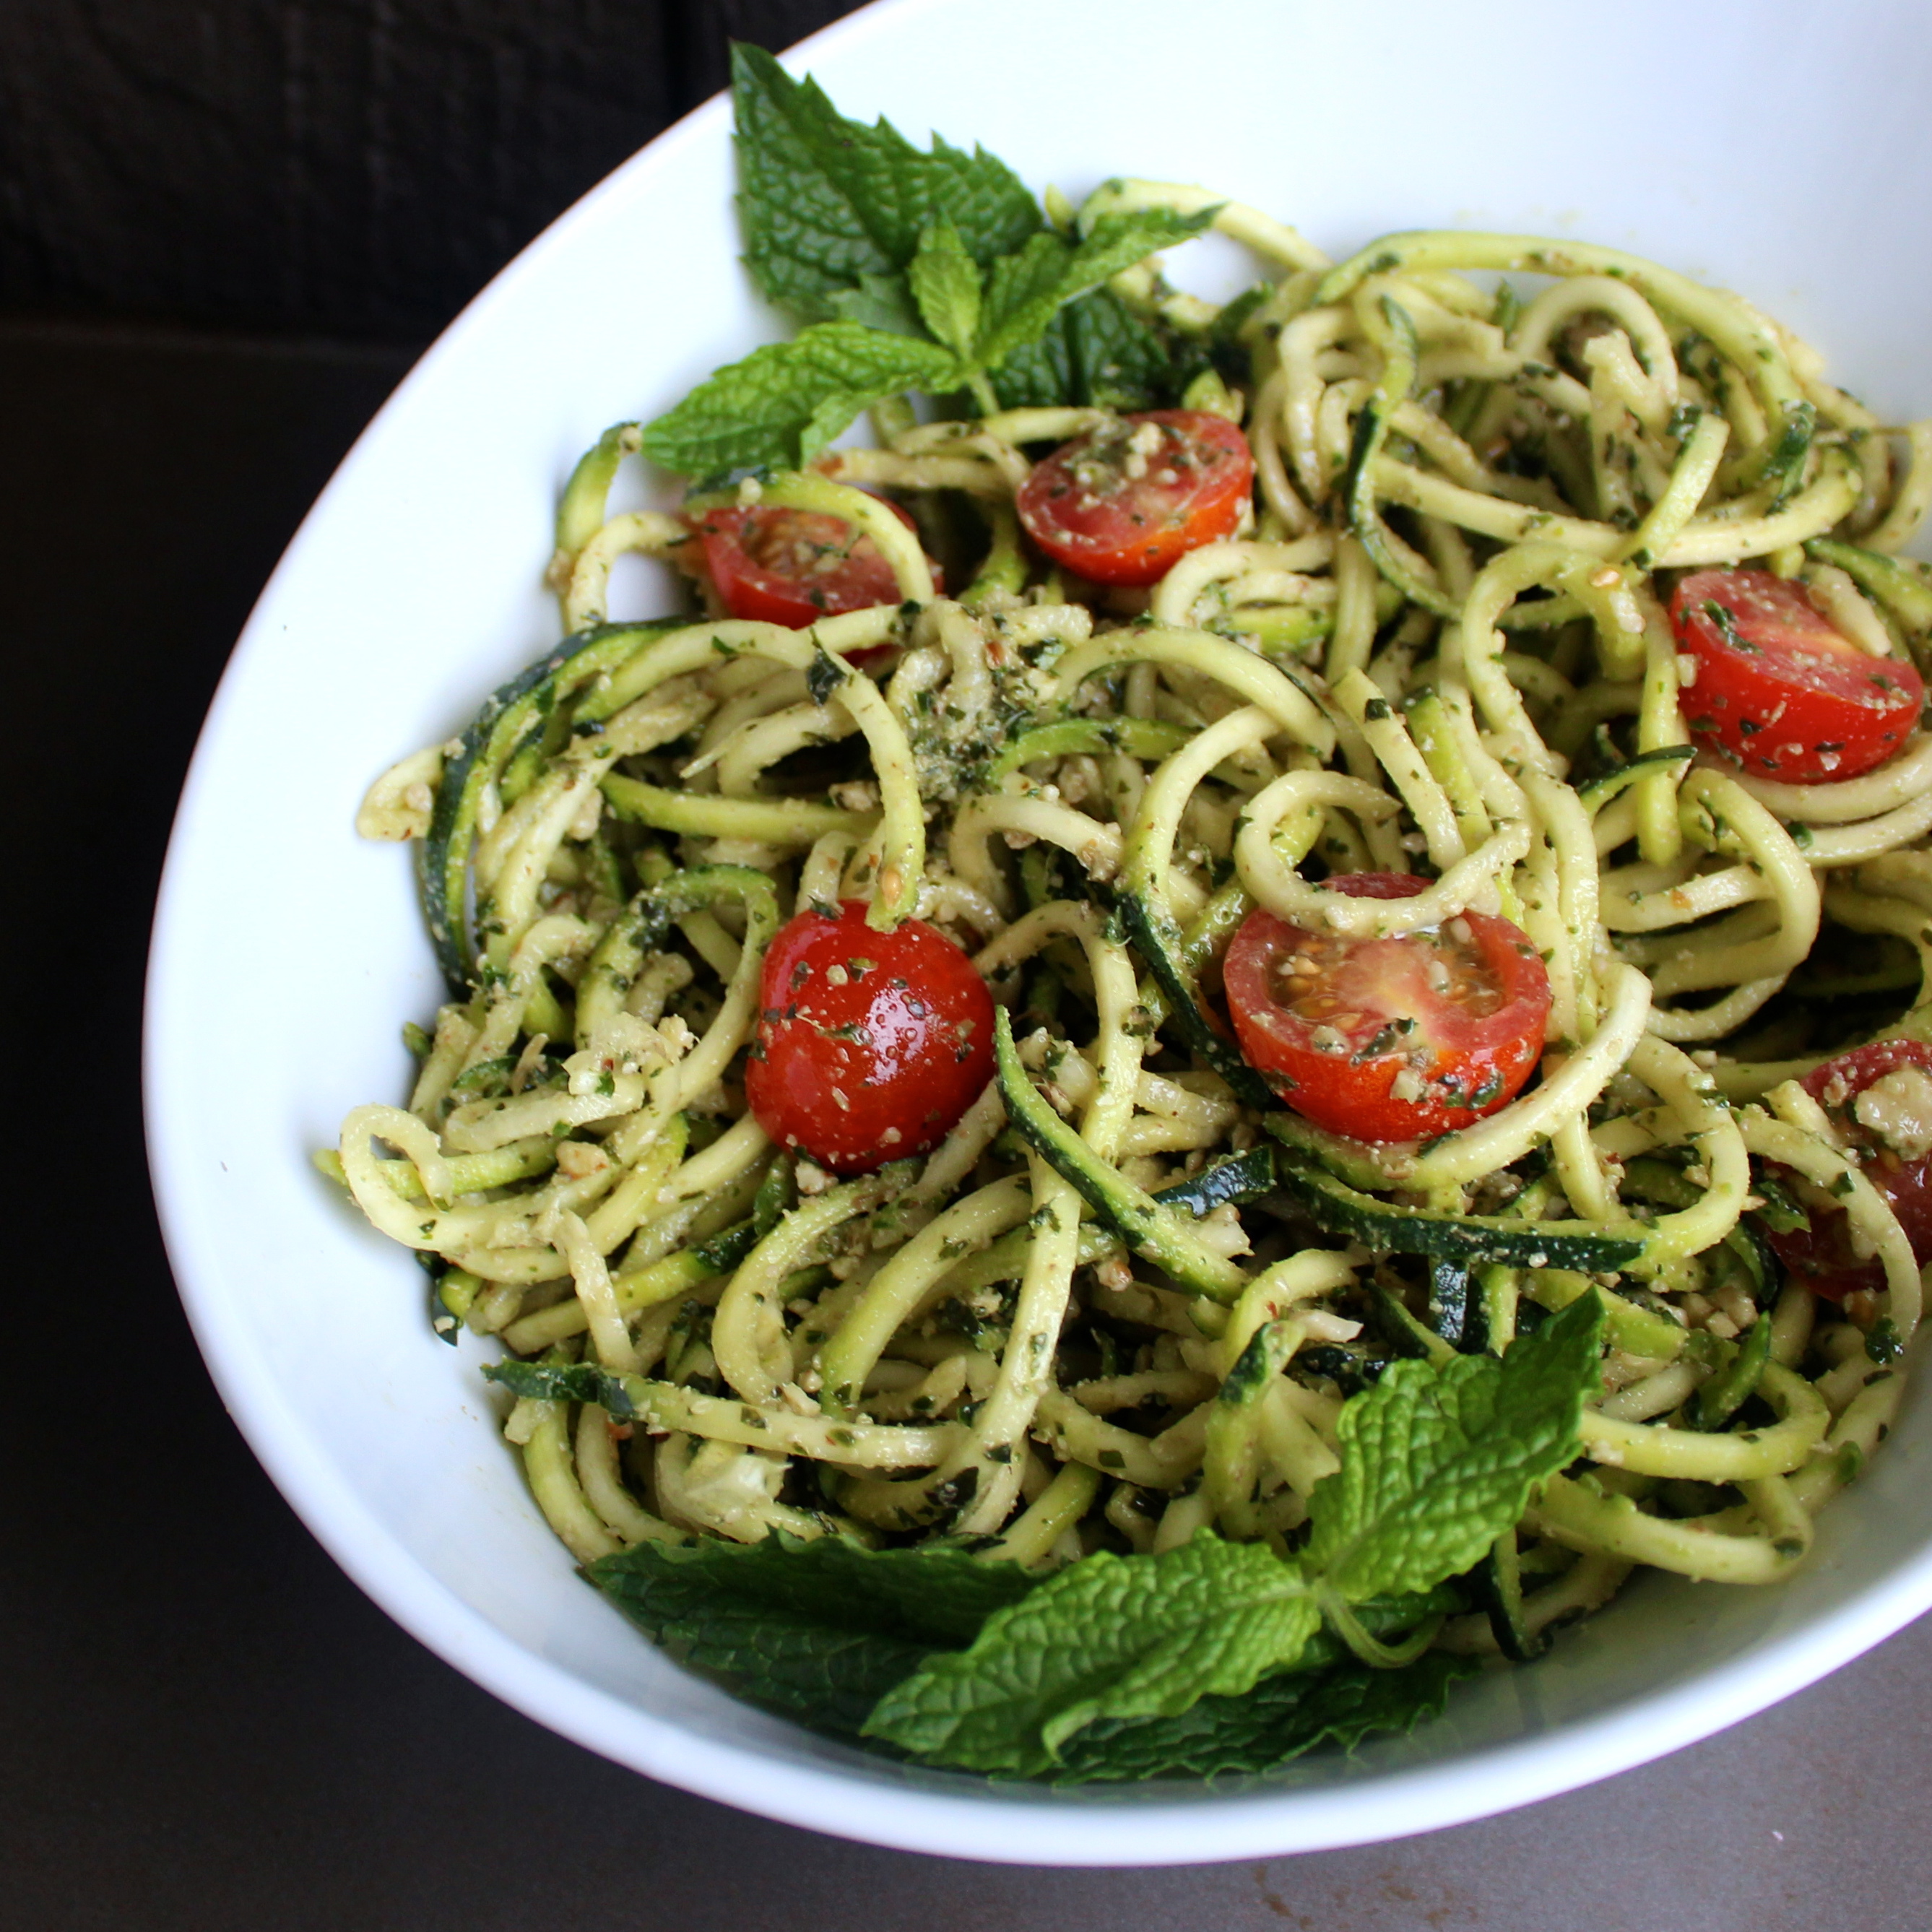 Inspiralized Zucchini Noodles with Mint Pesto